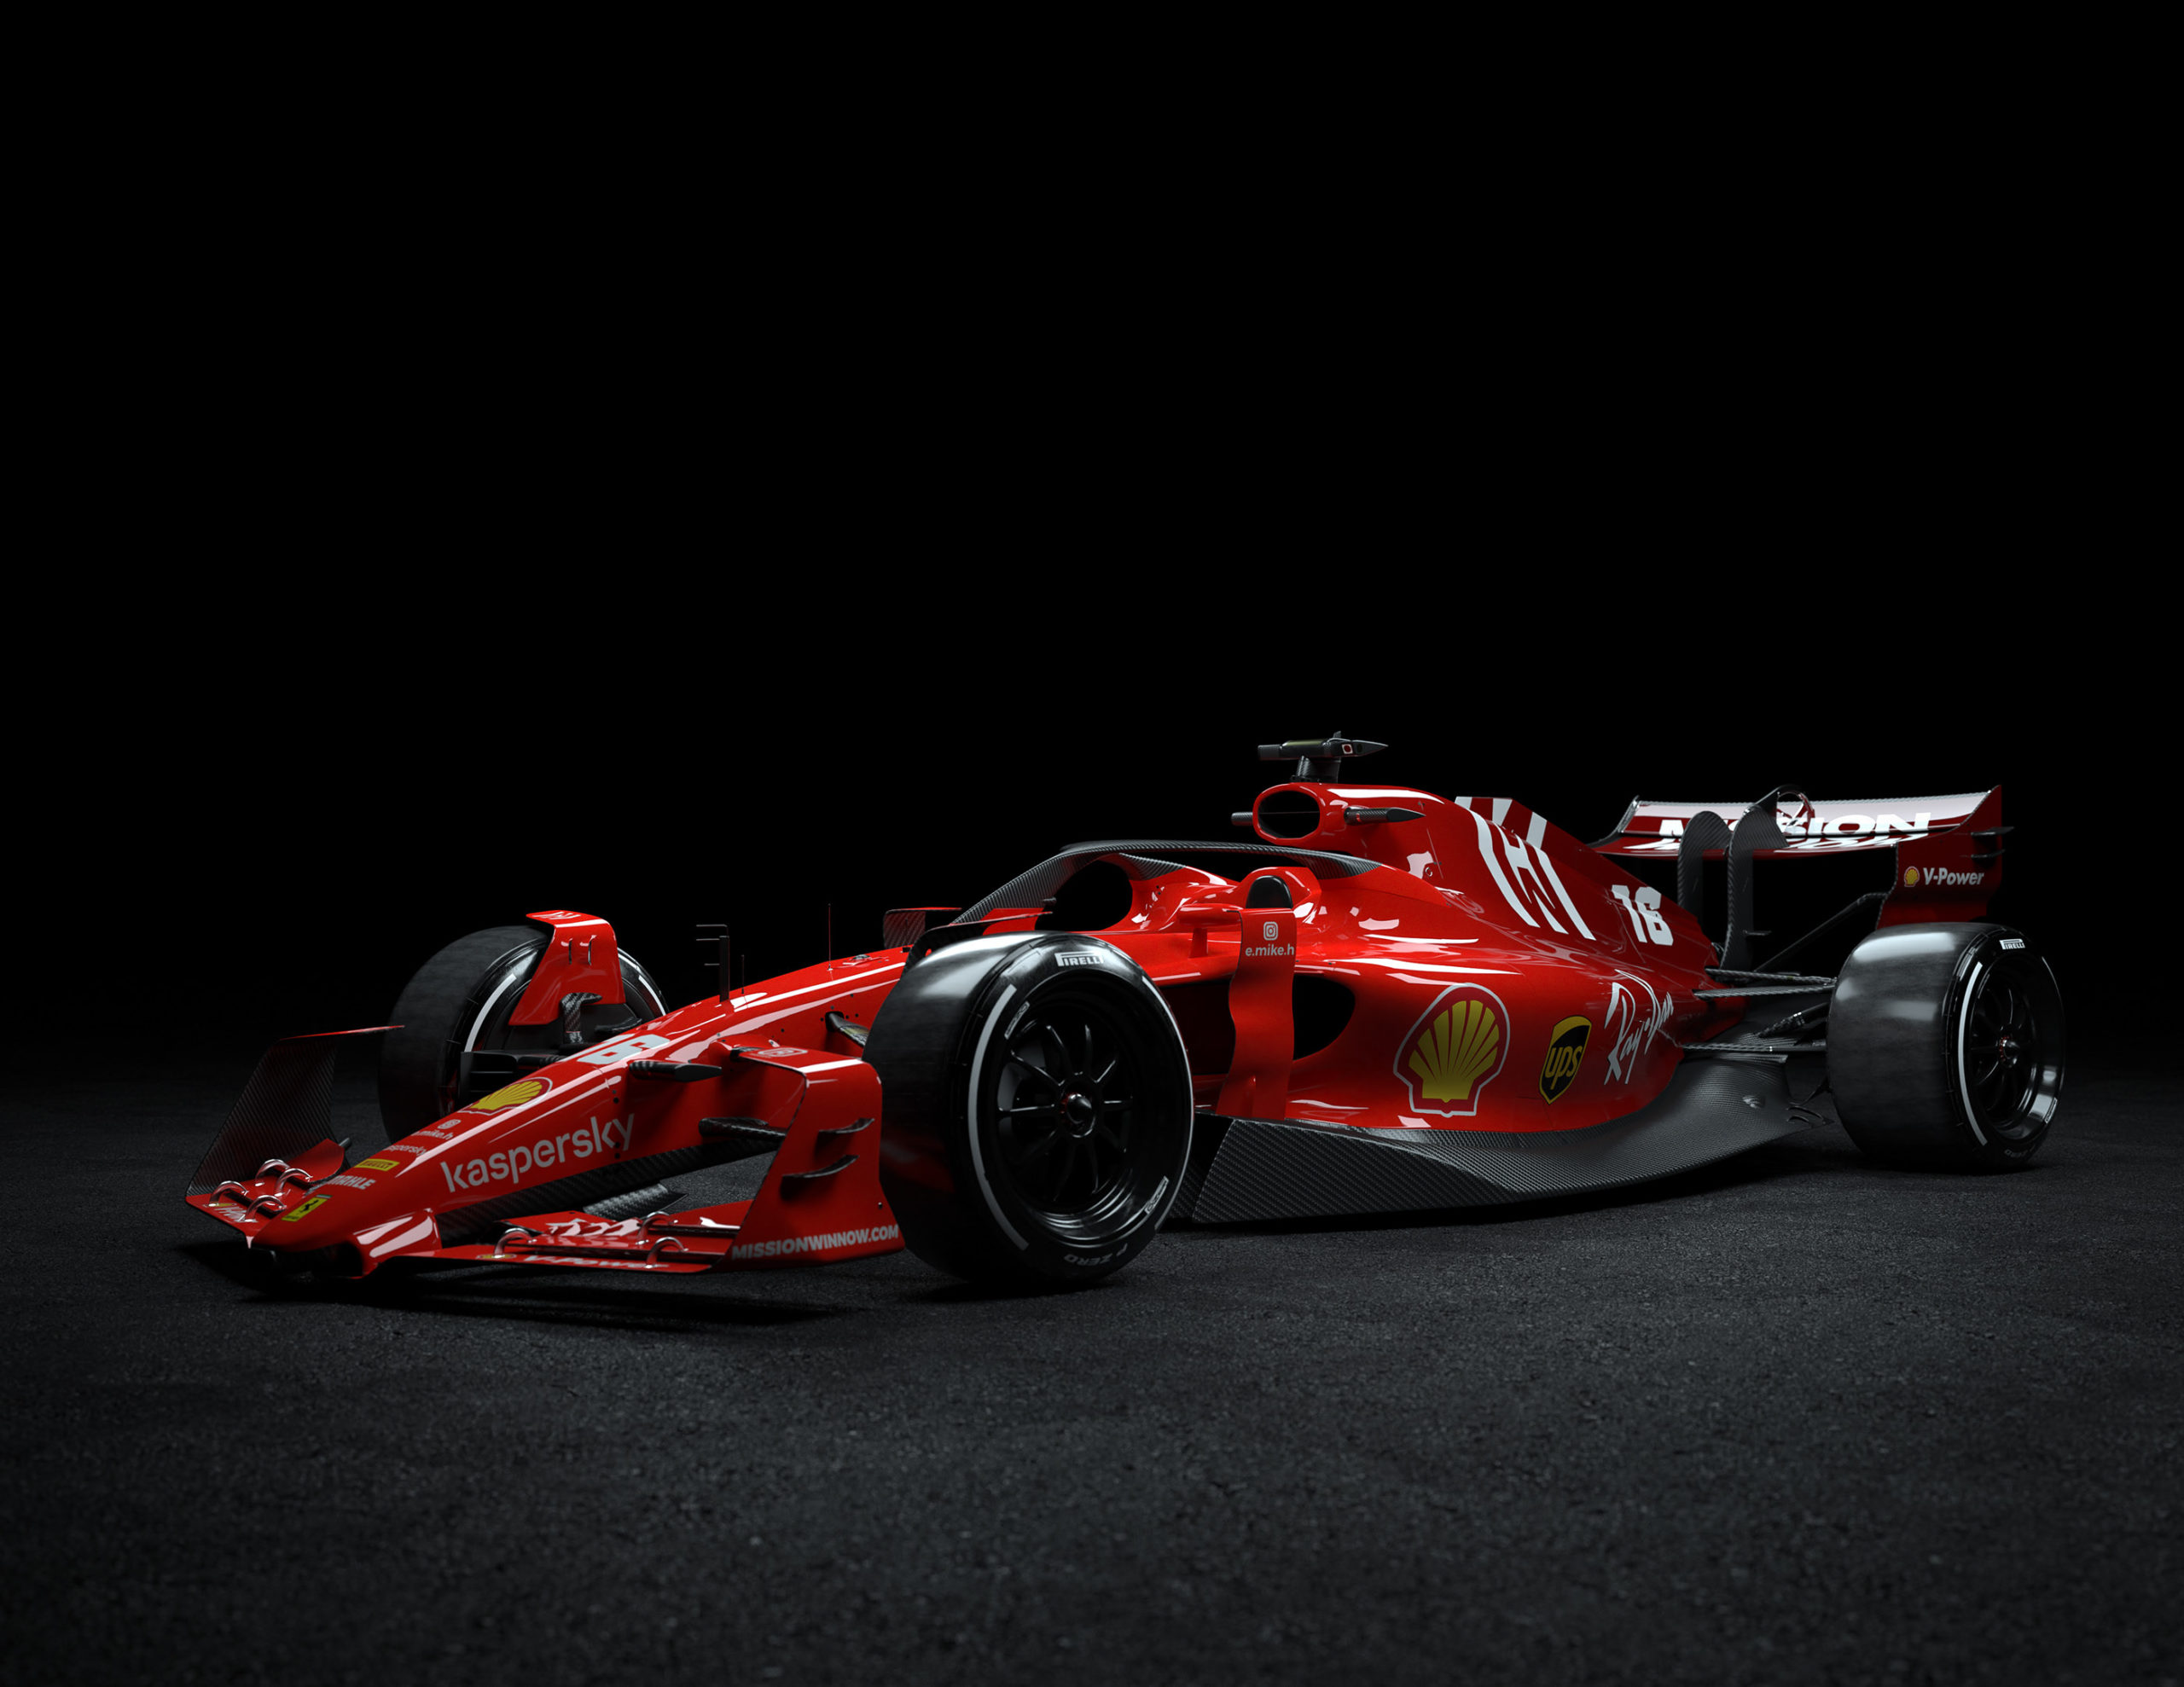 Ferrari launched its new appearance for the 2022 season